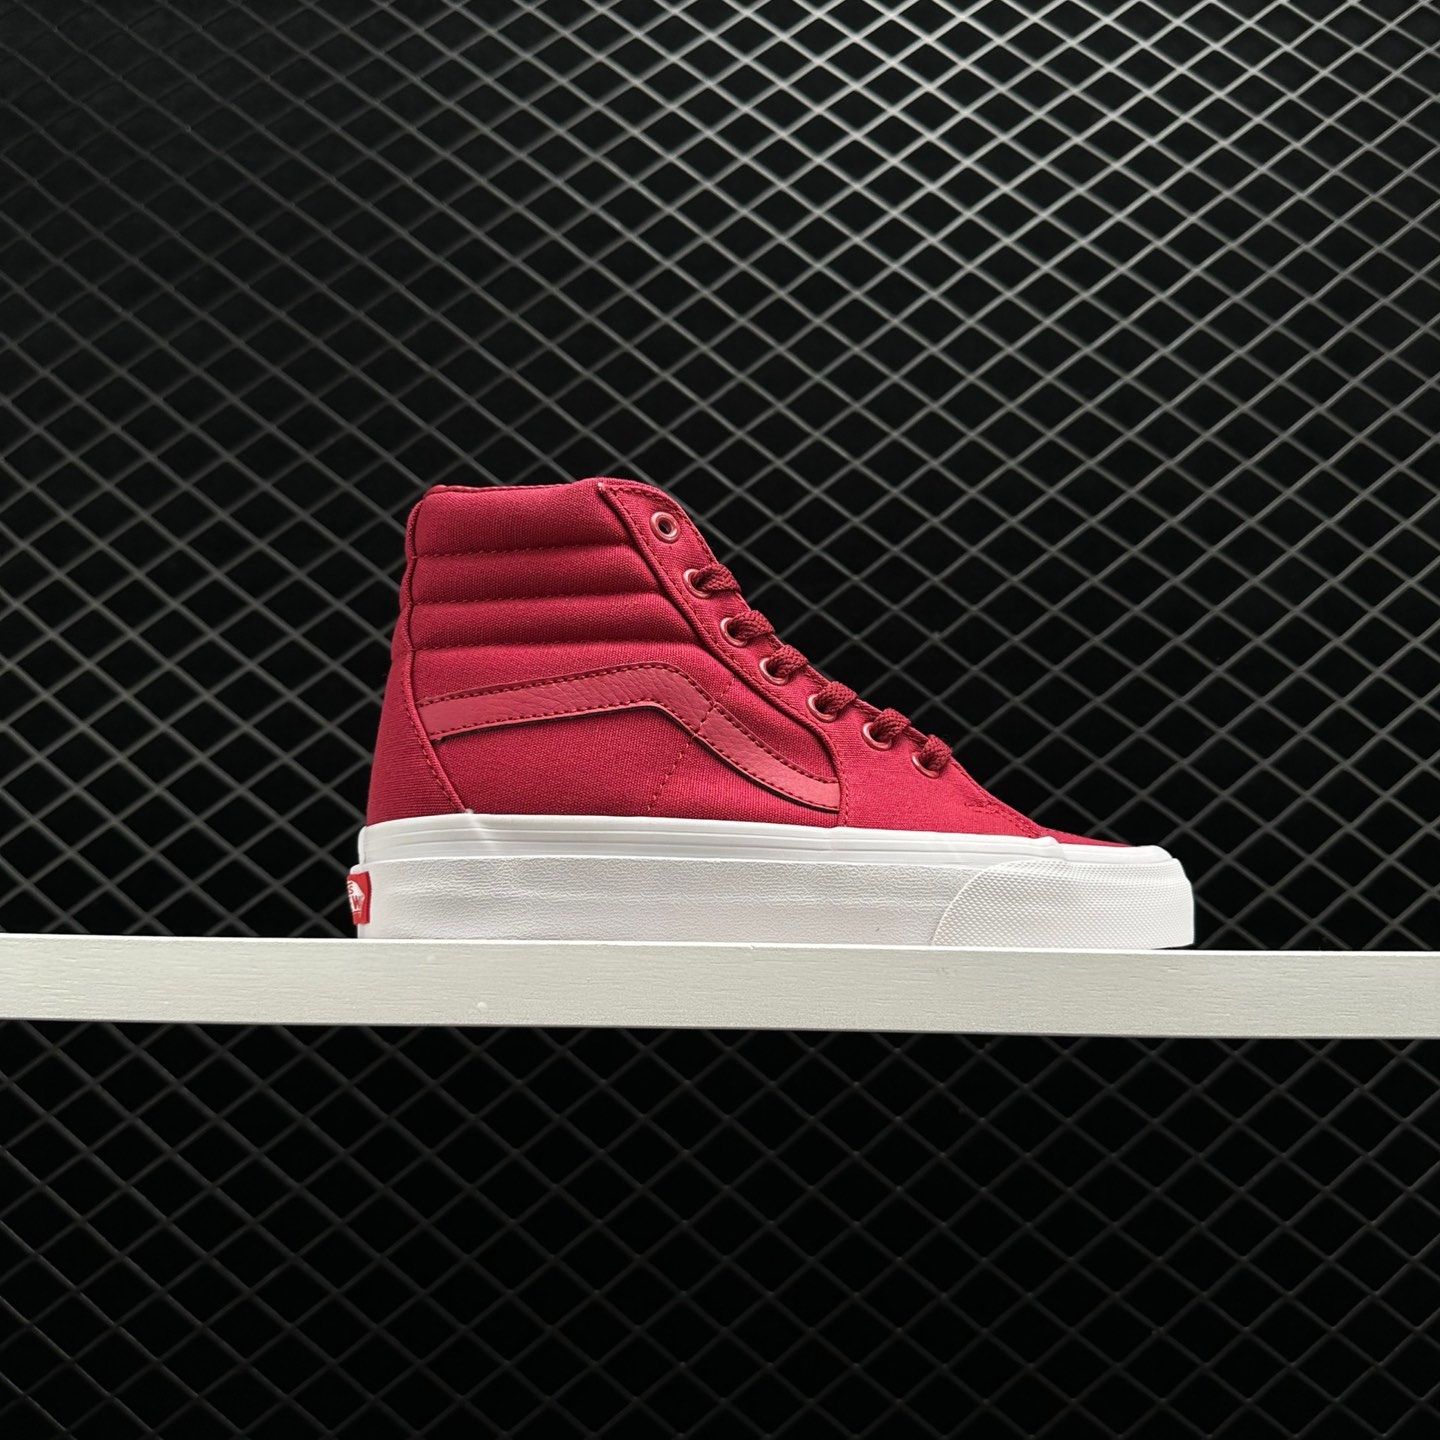 Vans SK8 Hi Mono Canvas Chili Pepper - Bold Red High-Top Sneakers